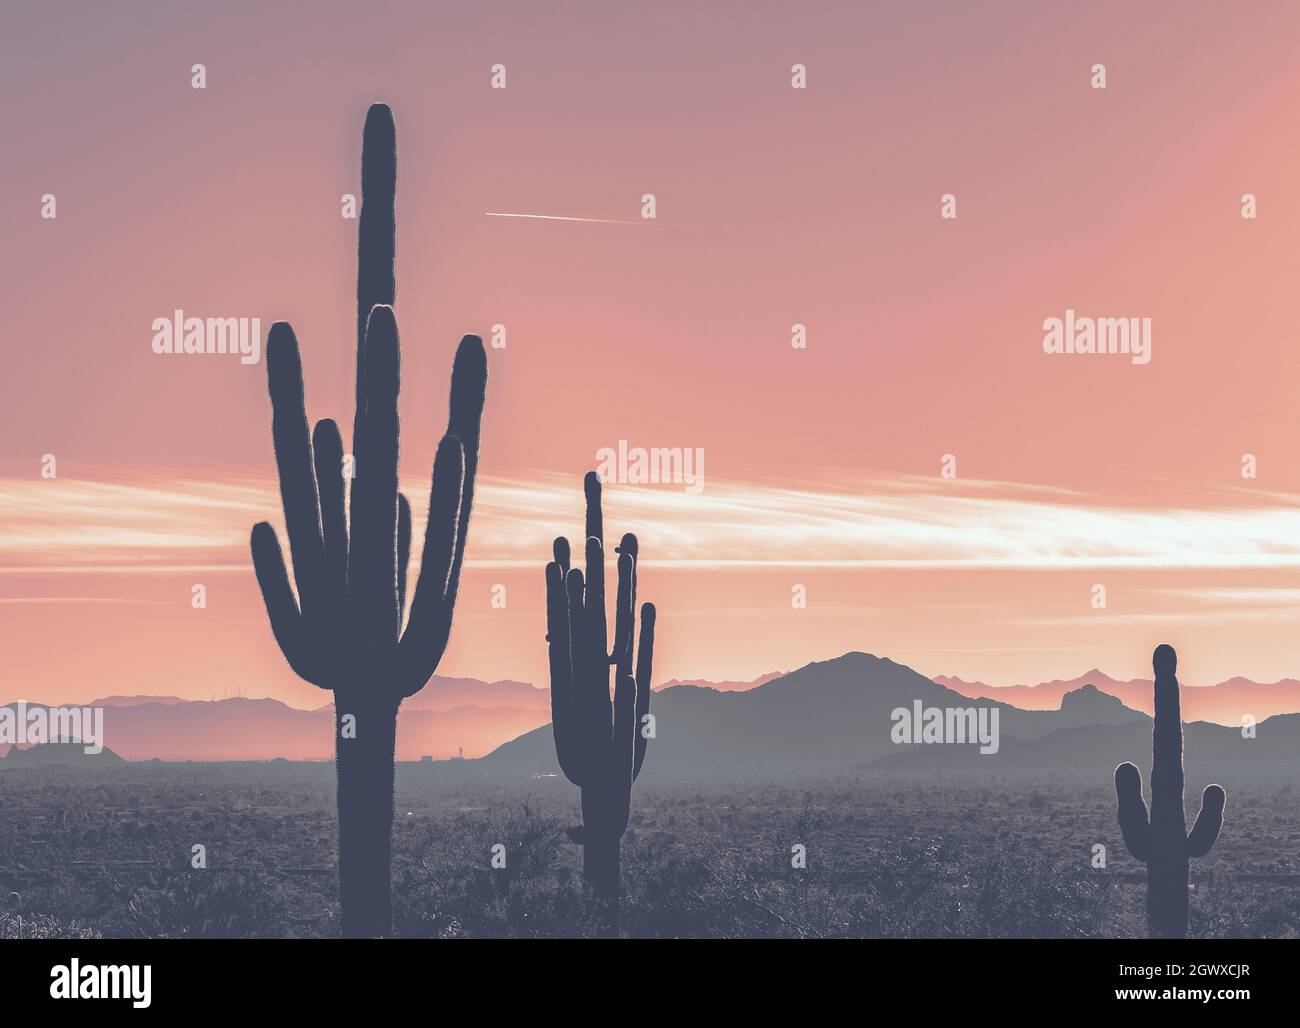 Silhouette Cactus In Field Against Sky During Sunset Stock Photo